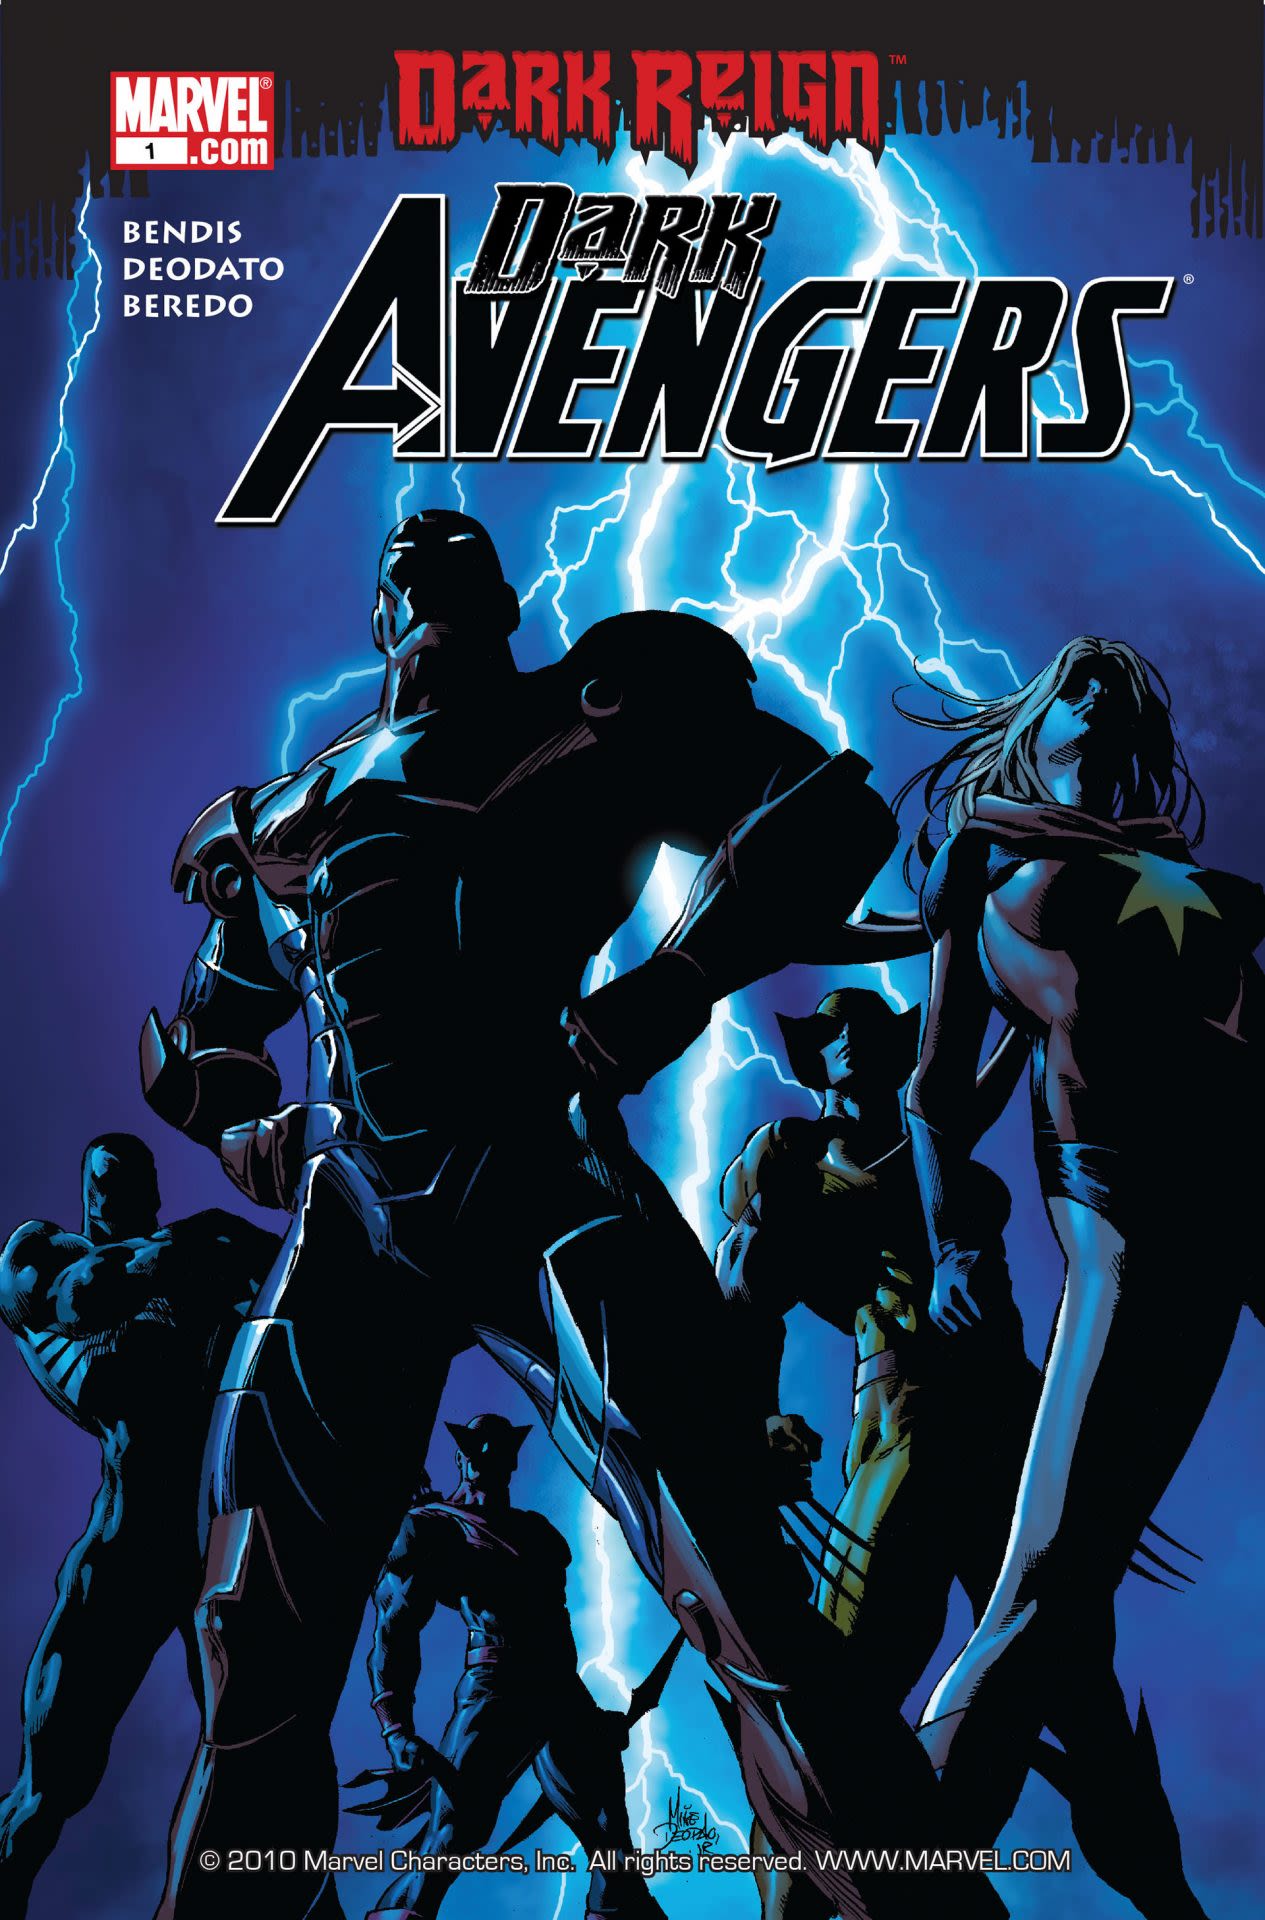 The ‘New Focus’ Marvel Should Take with AVENGERS 5